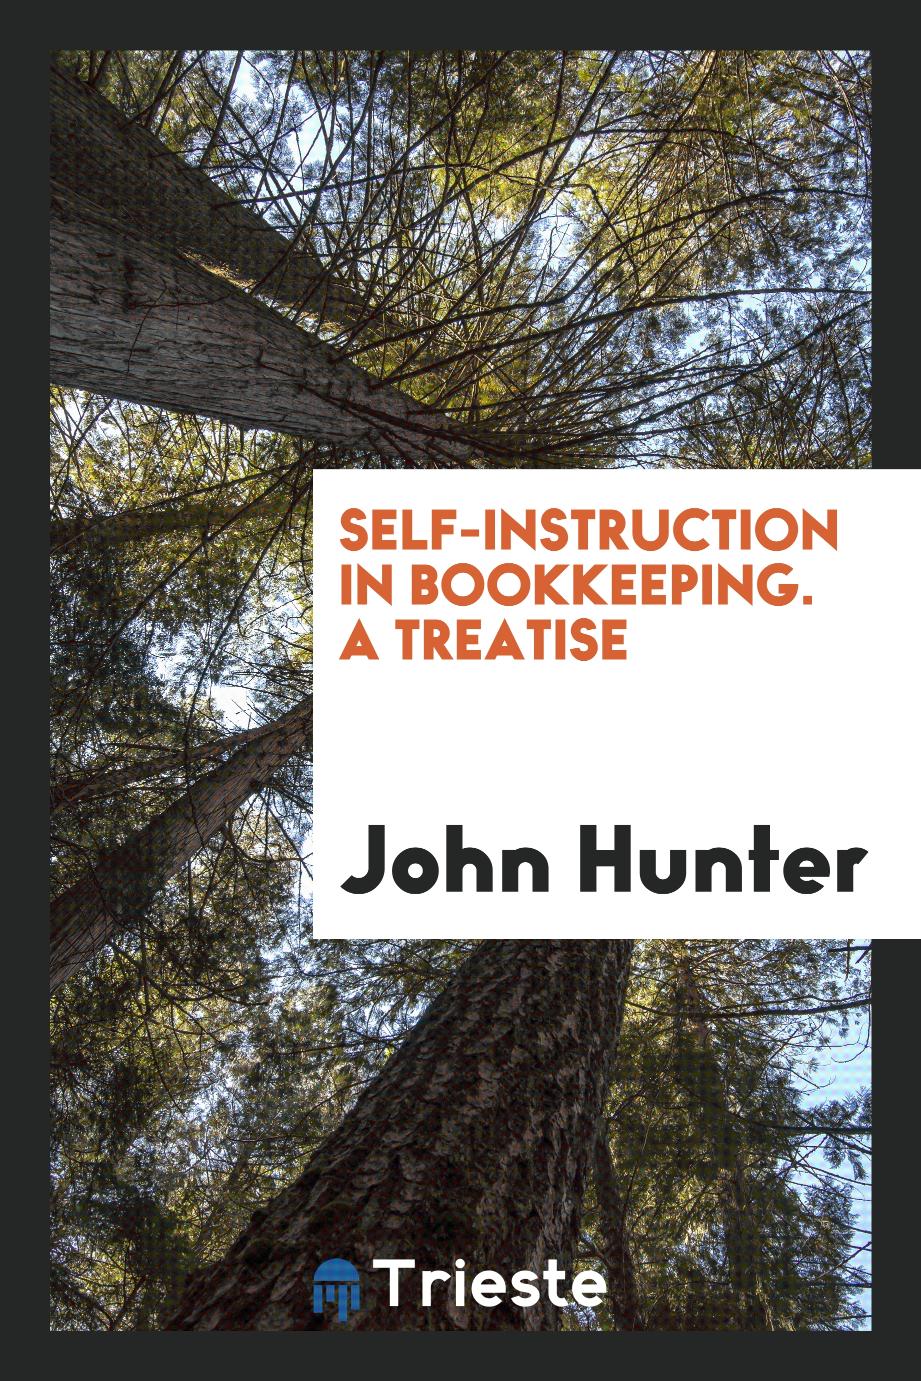 Self-Instruction in Bookkeeping. A Treatise